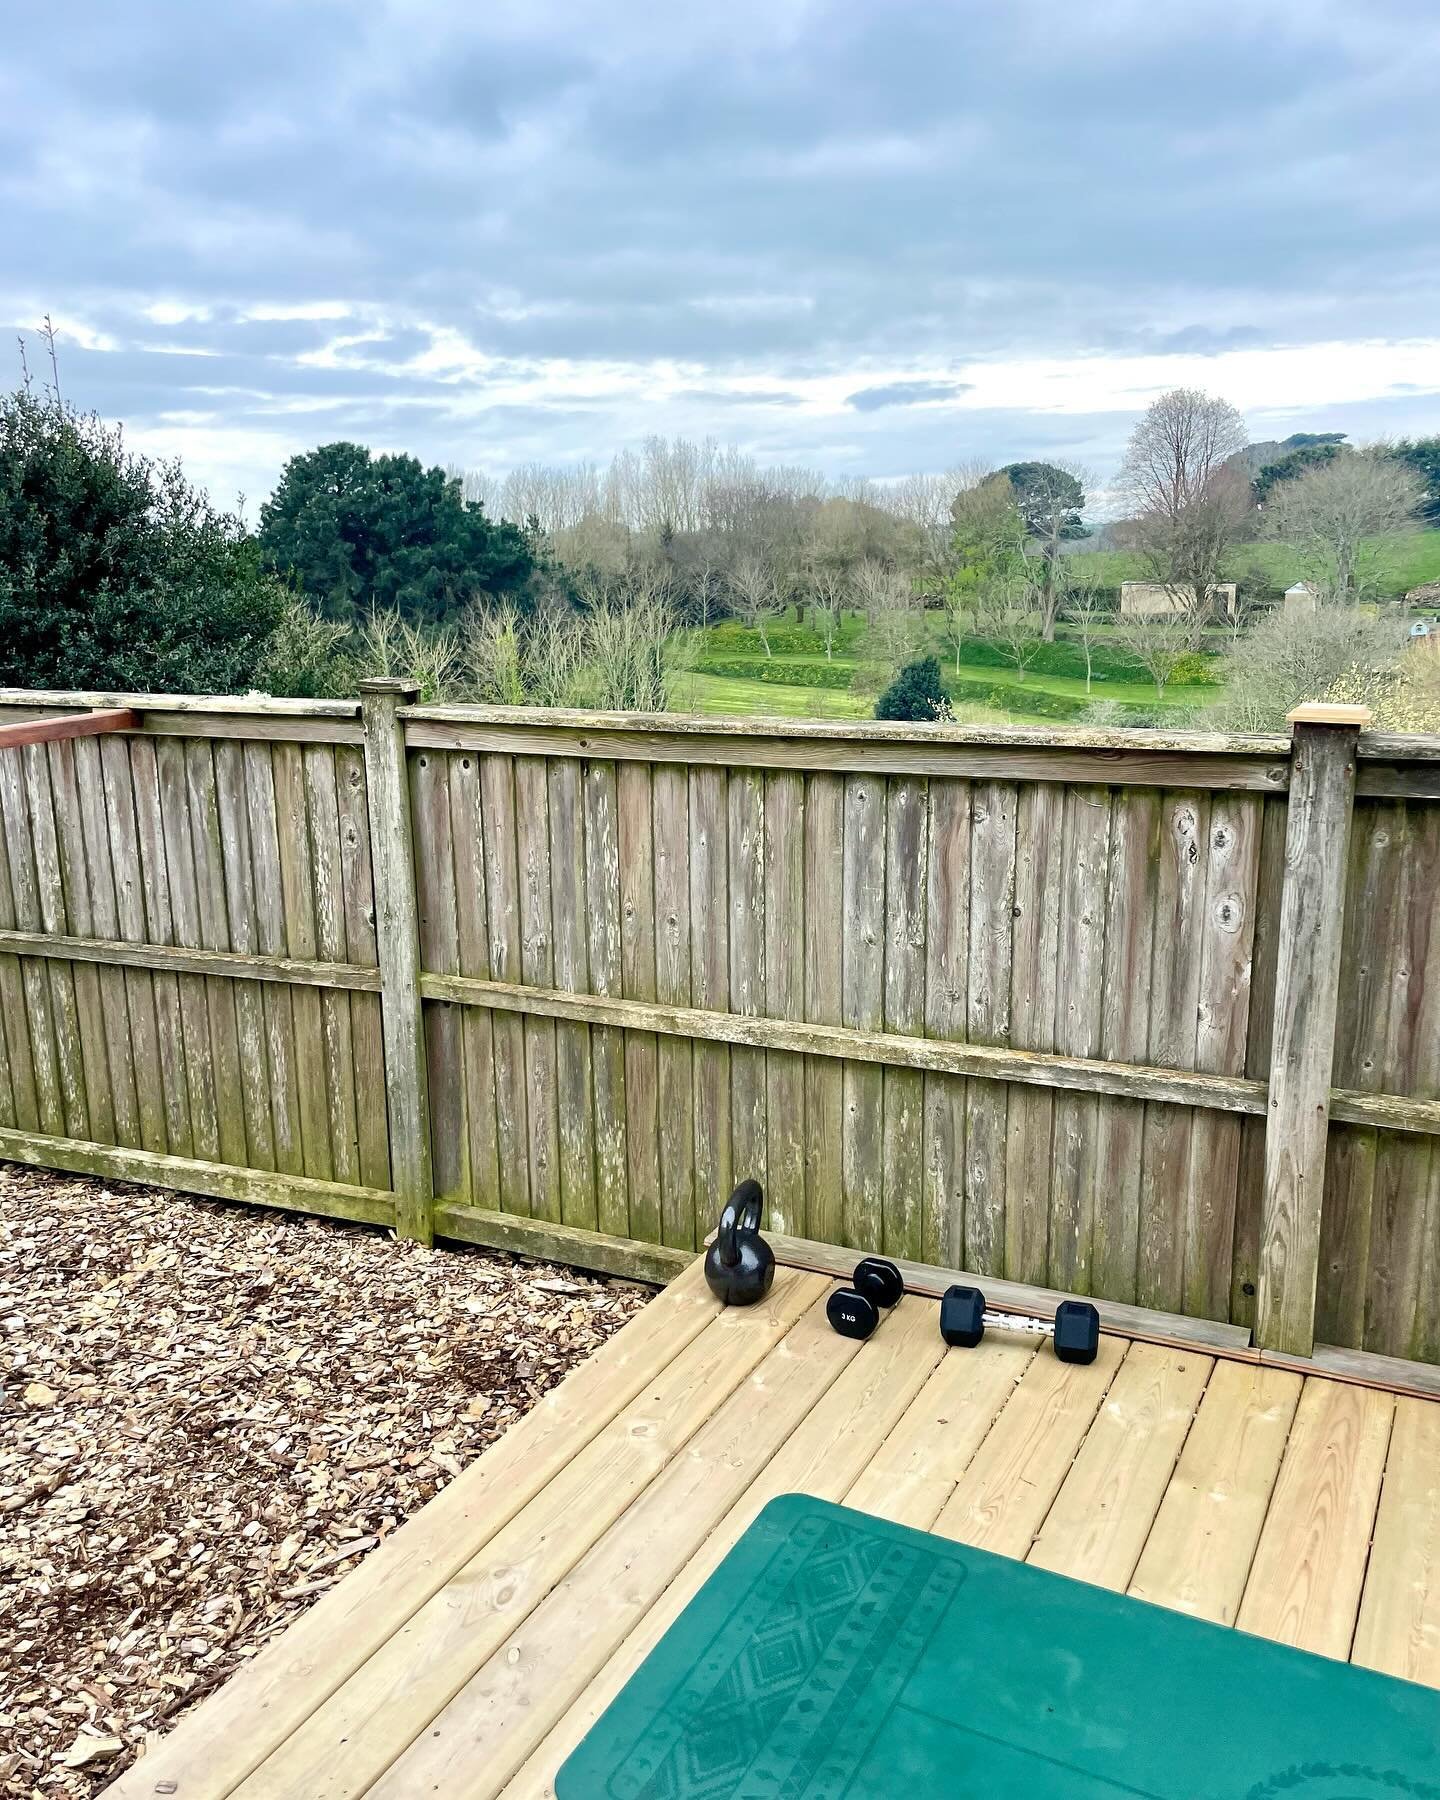 Spring is officially here 💚

Today has made me so excited for these brighter mornings, lighter evenings and lots more PT sessions on the deck with this view, listening to the birds merrily tweeting 🐦 
I even had my lunch alfresco today! 🥗 Things a